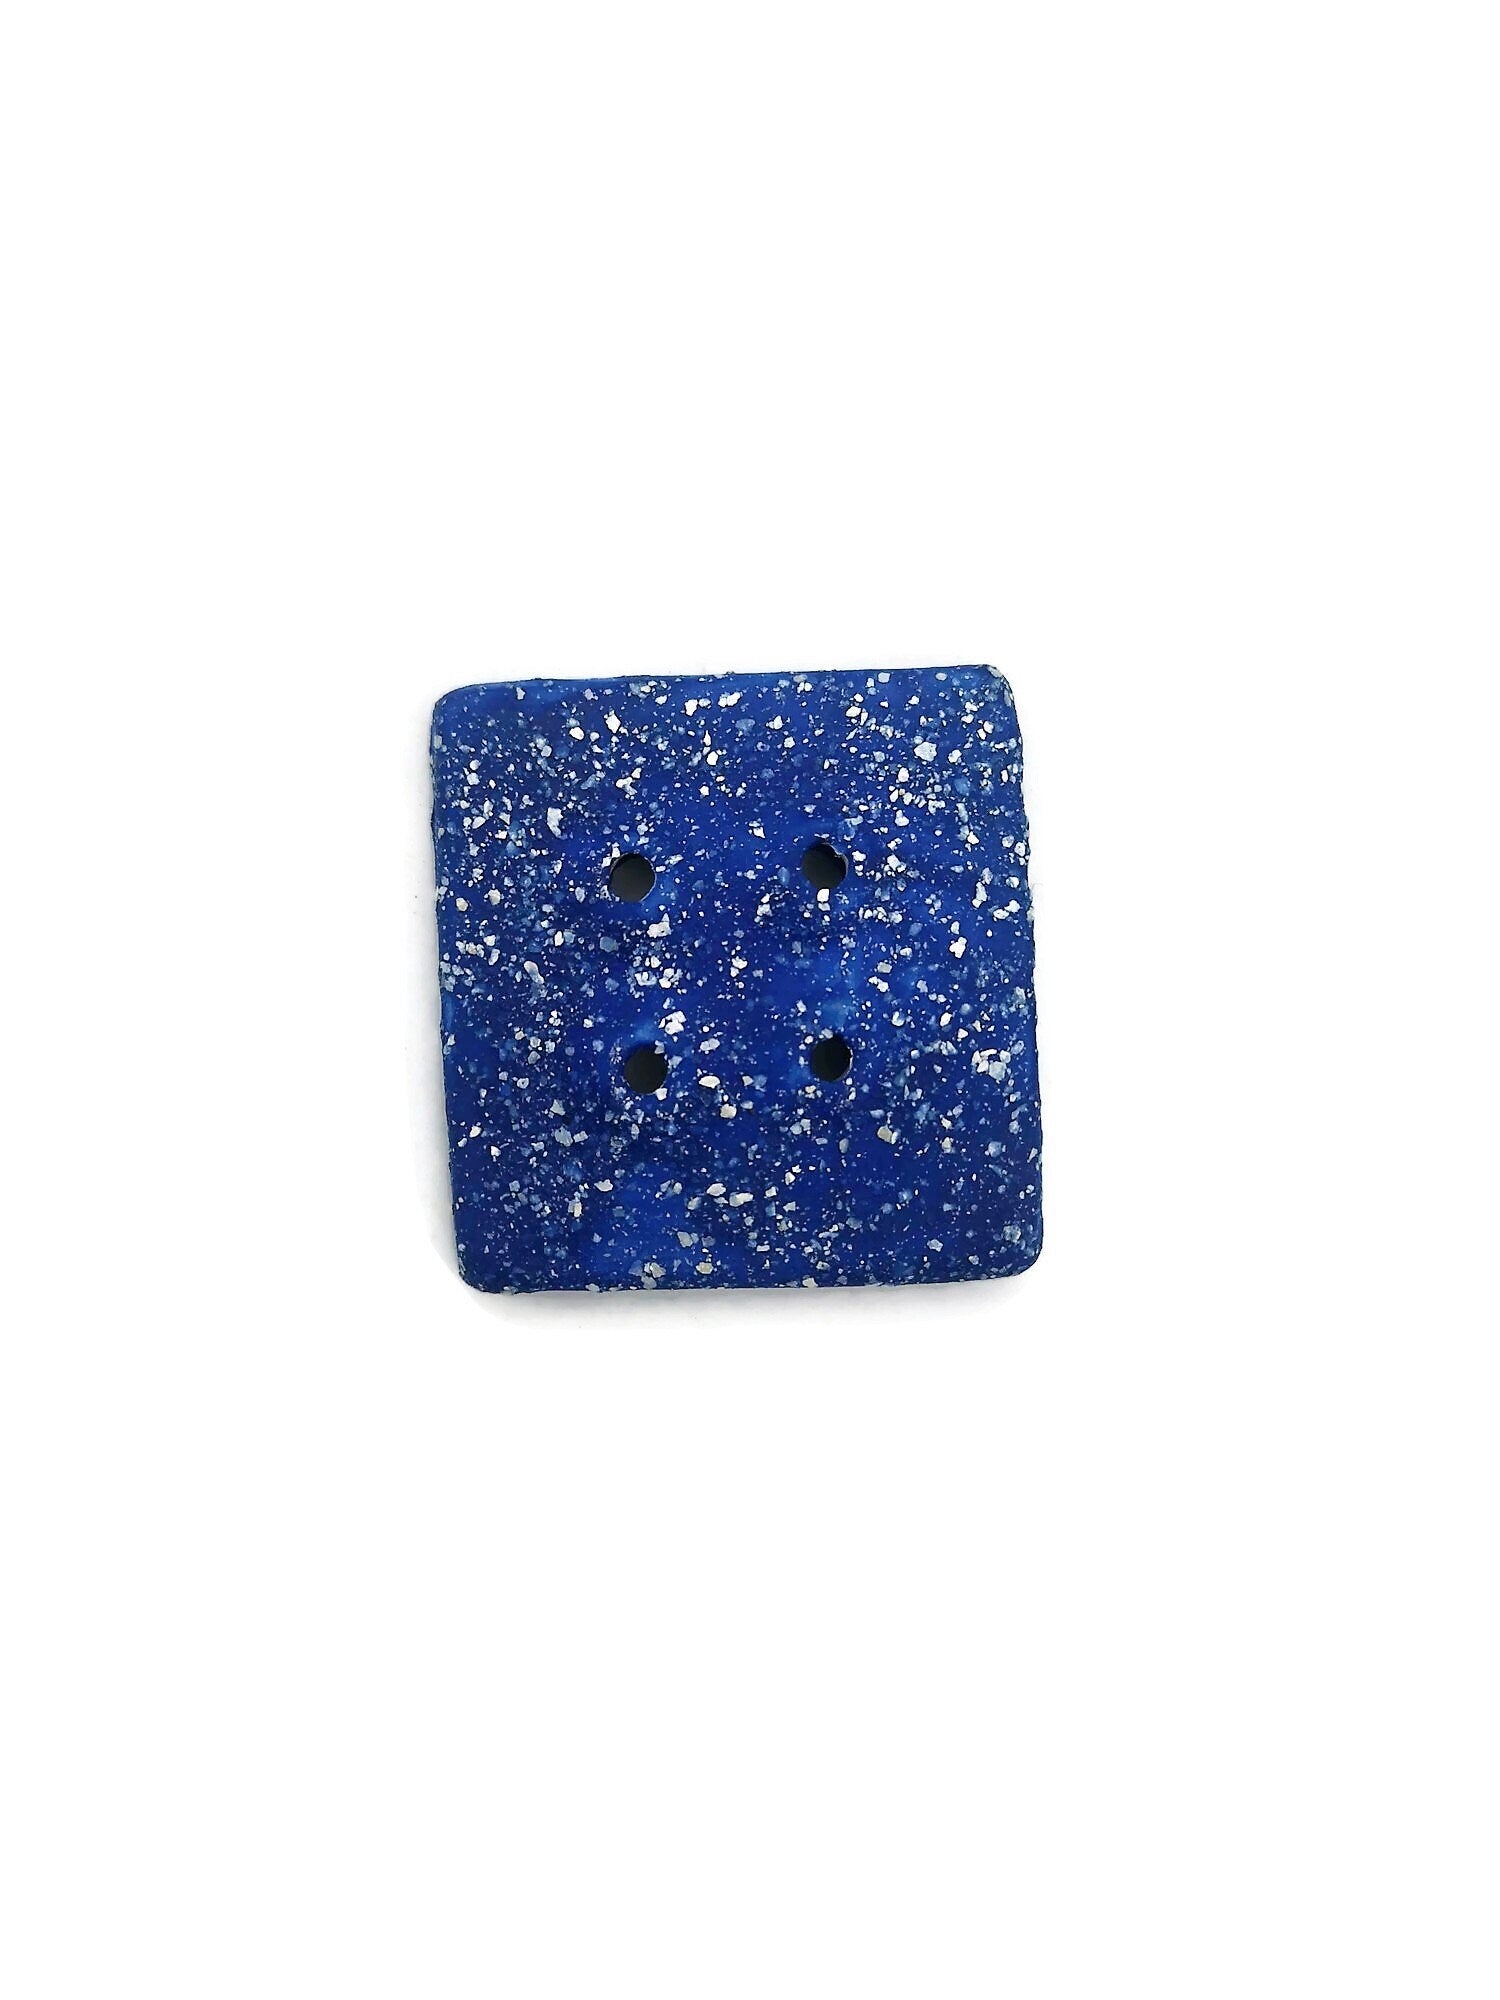 3Pc Extra Large Coat Buttons 40mm, Sparkly Blue Novelty Square Handmade Ceramic Sewing Supplies And Notions, Sewing Buttons For Blouse - Ceramica Ana Rafael